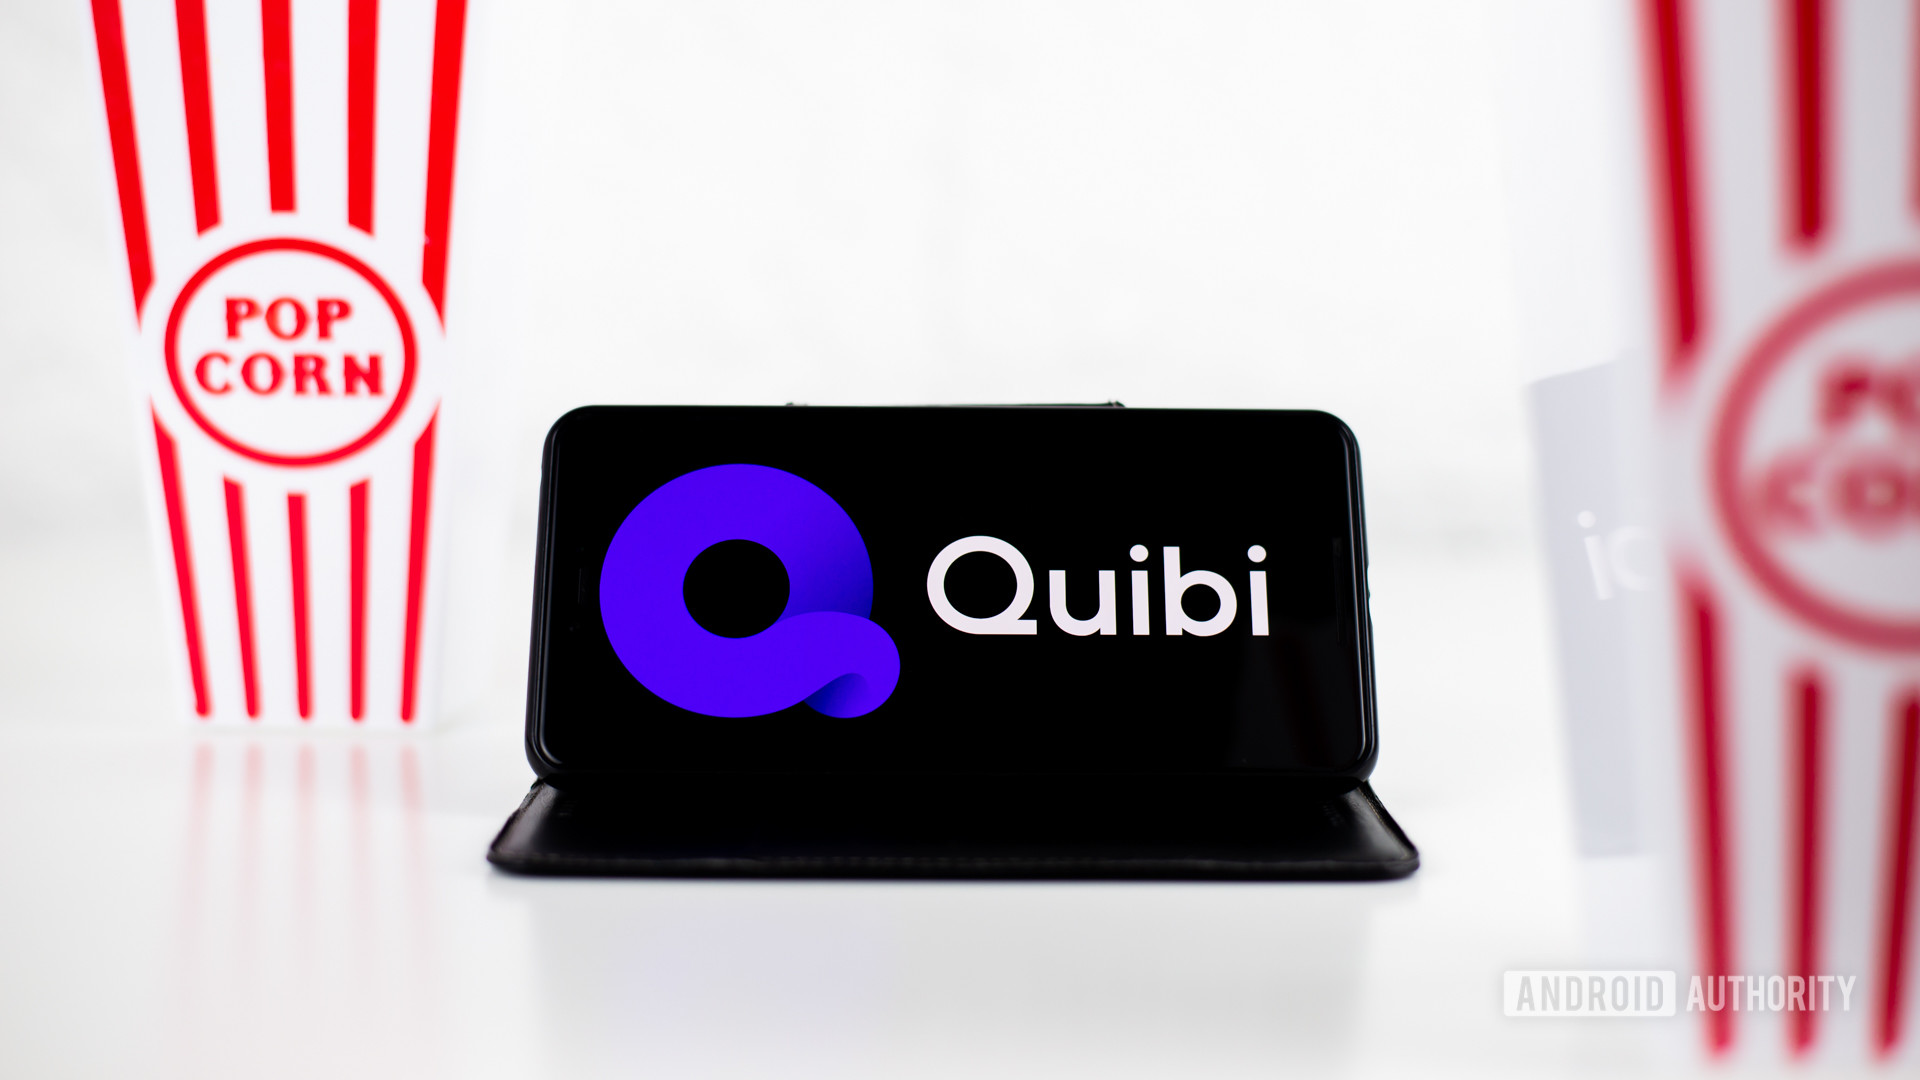 Quibi streaming app on Android smartphone stock photo 3